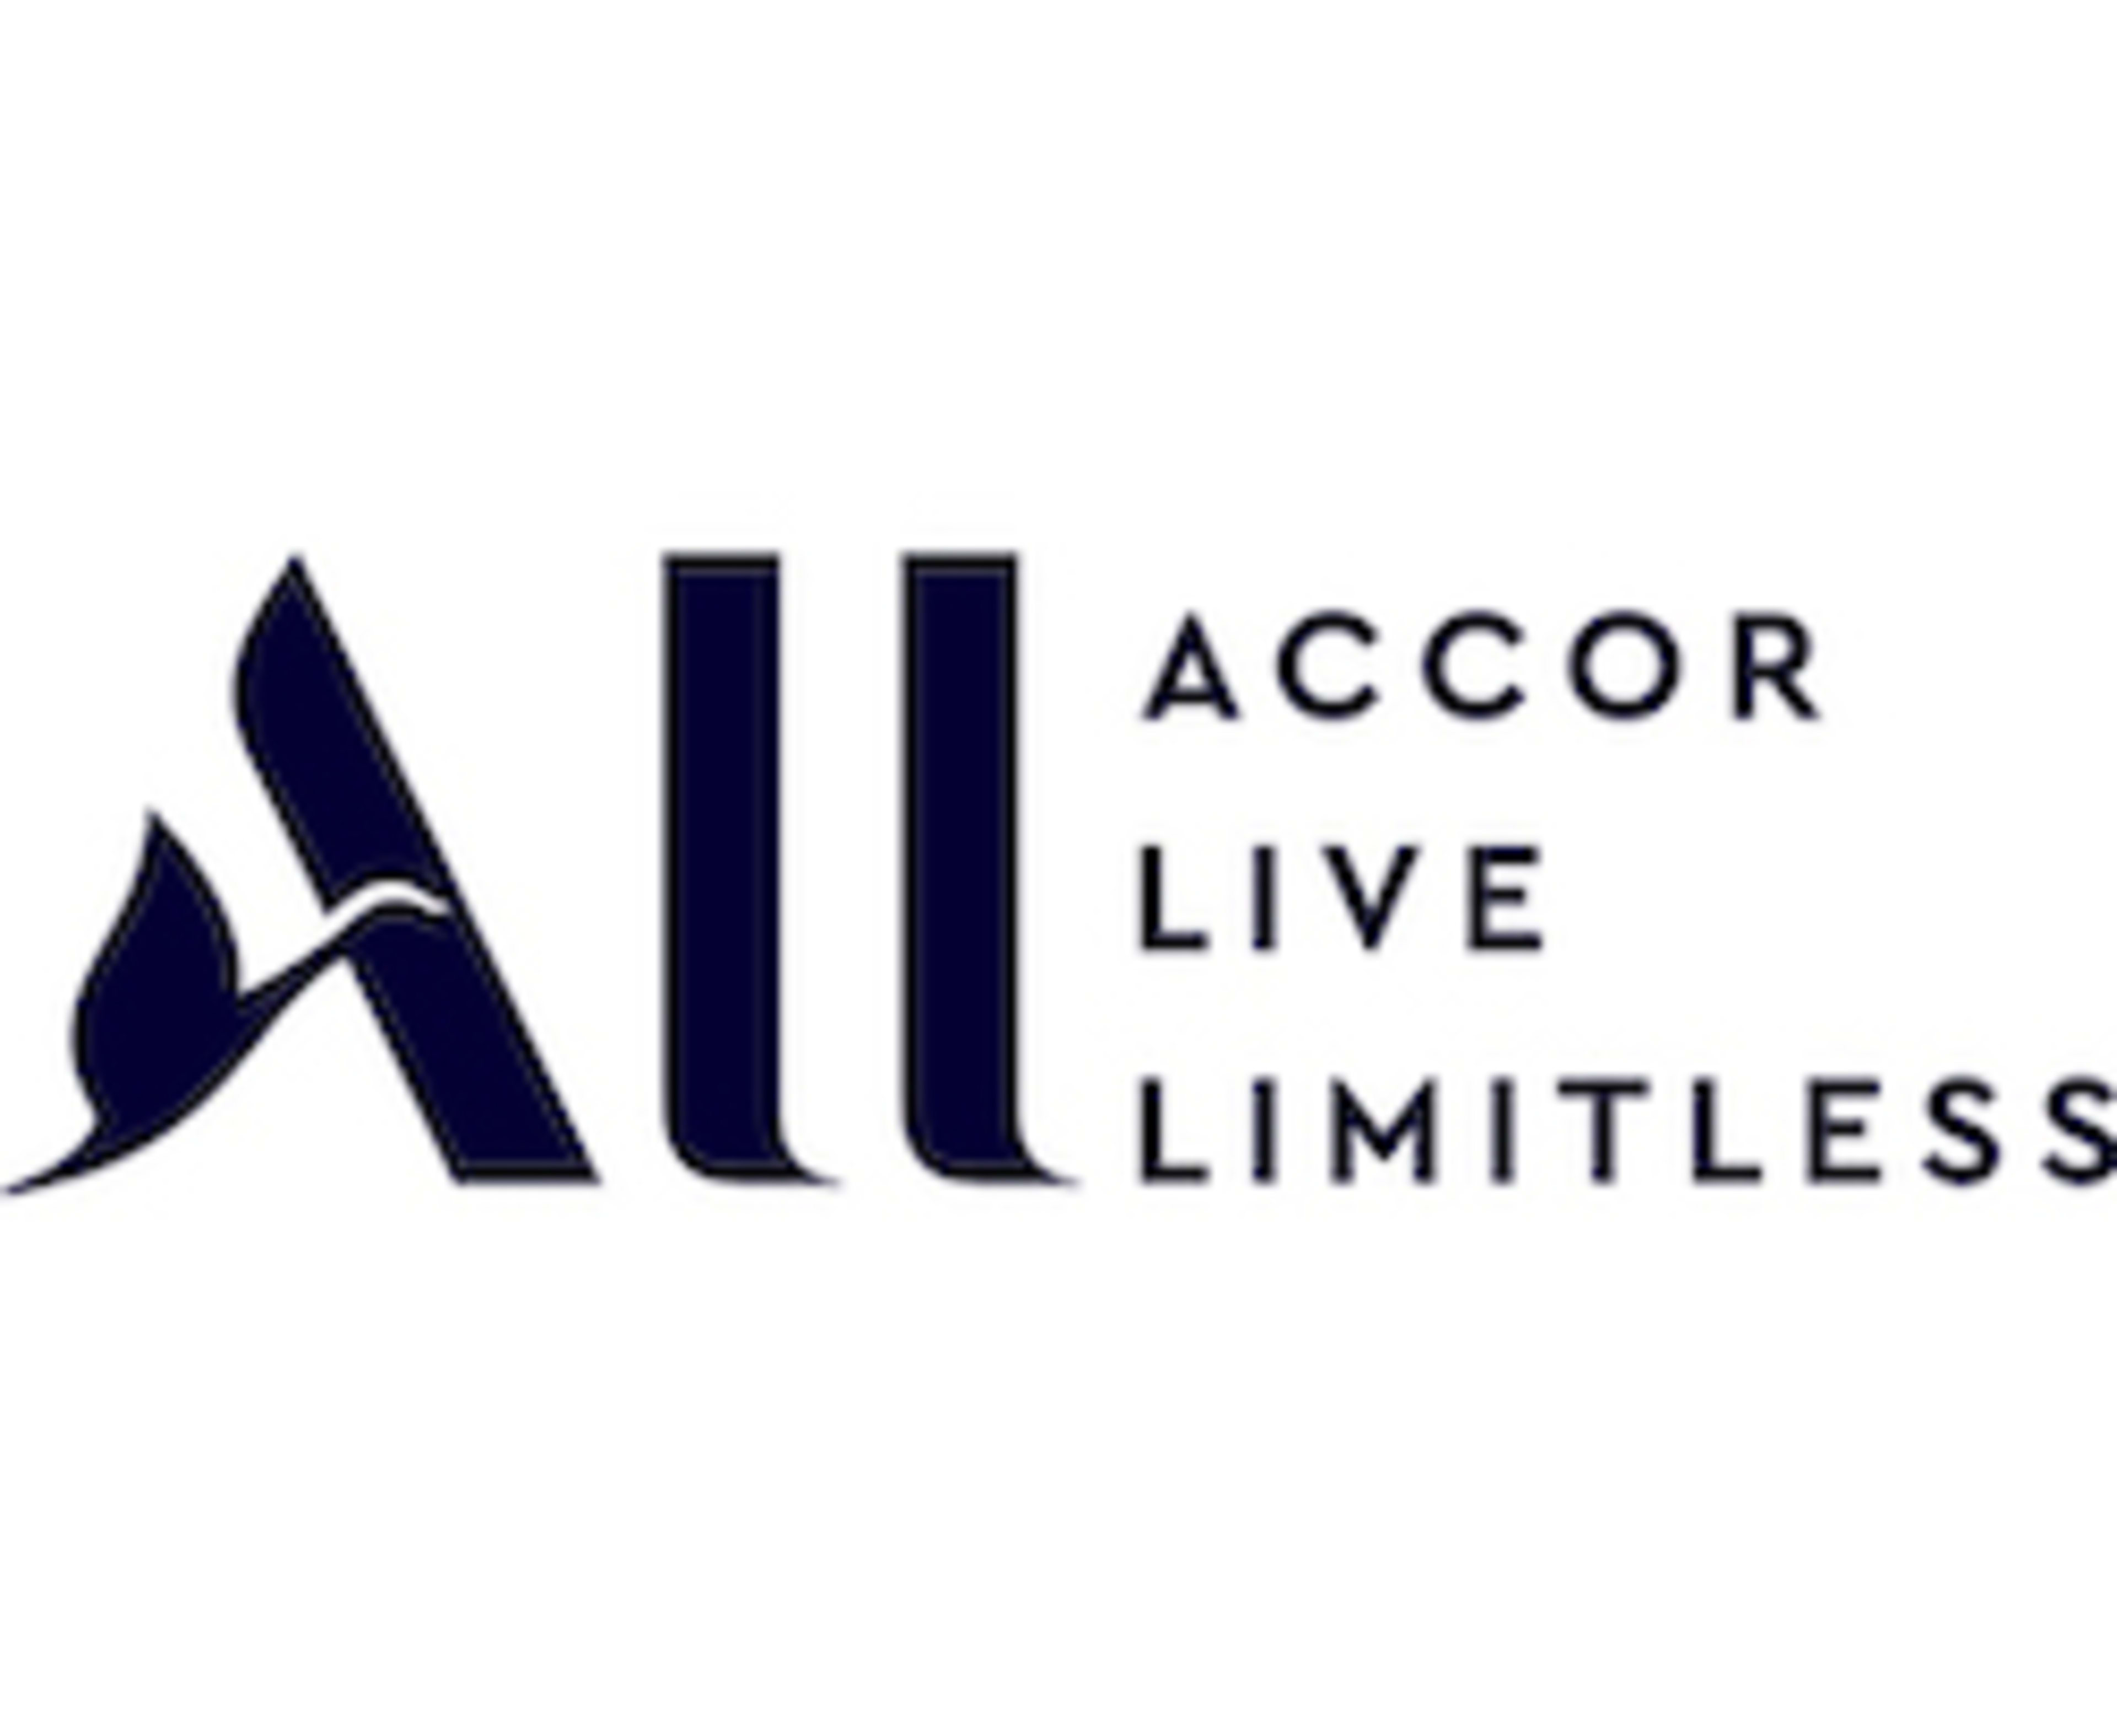 ALL - Accor Live Limitless Code